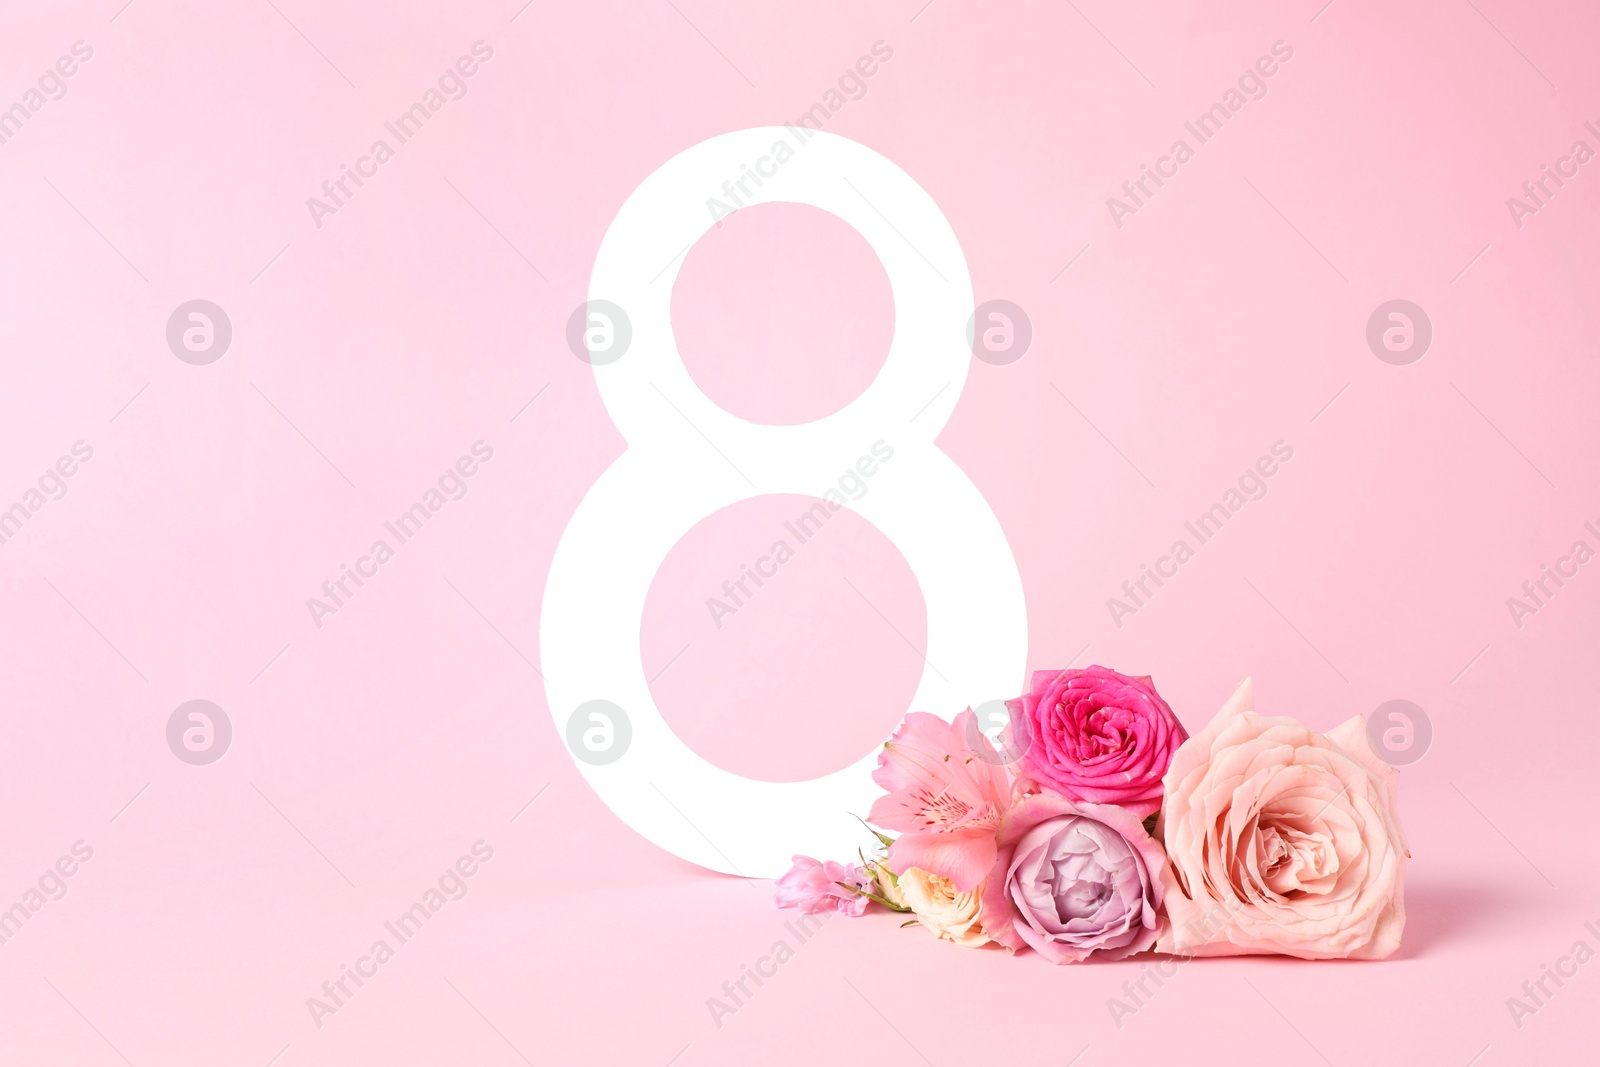 Photo of 8 March greeting card design with beautiful flowers on light pink background